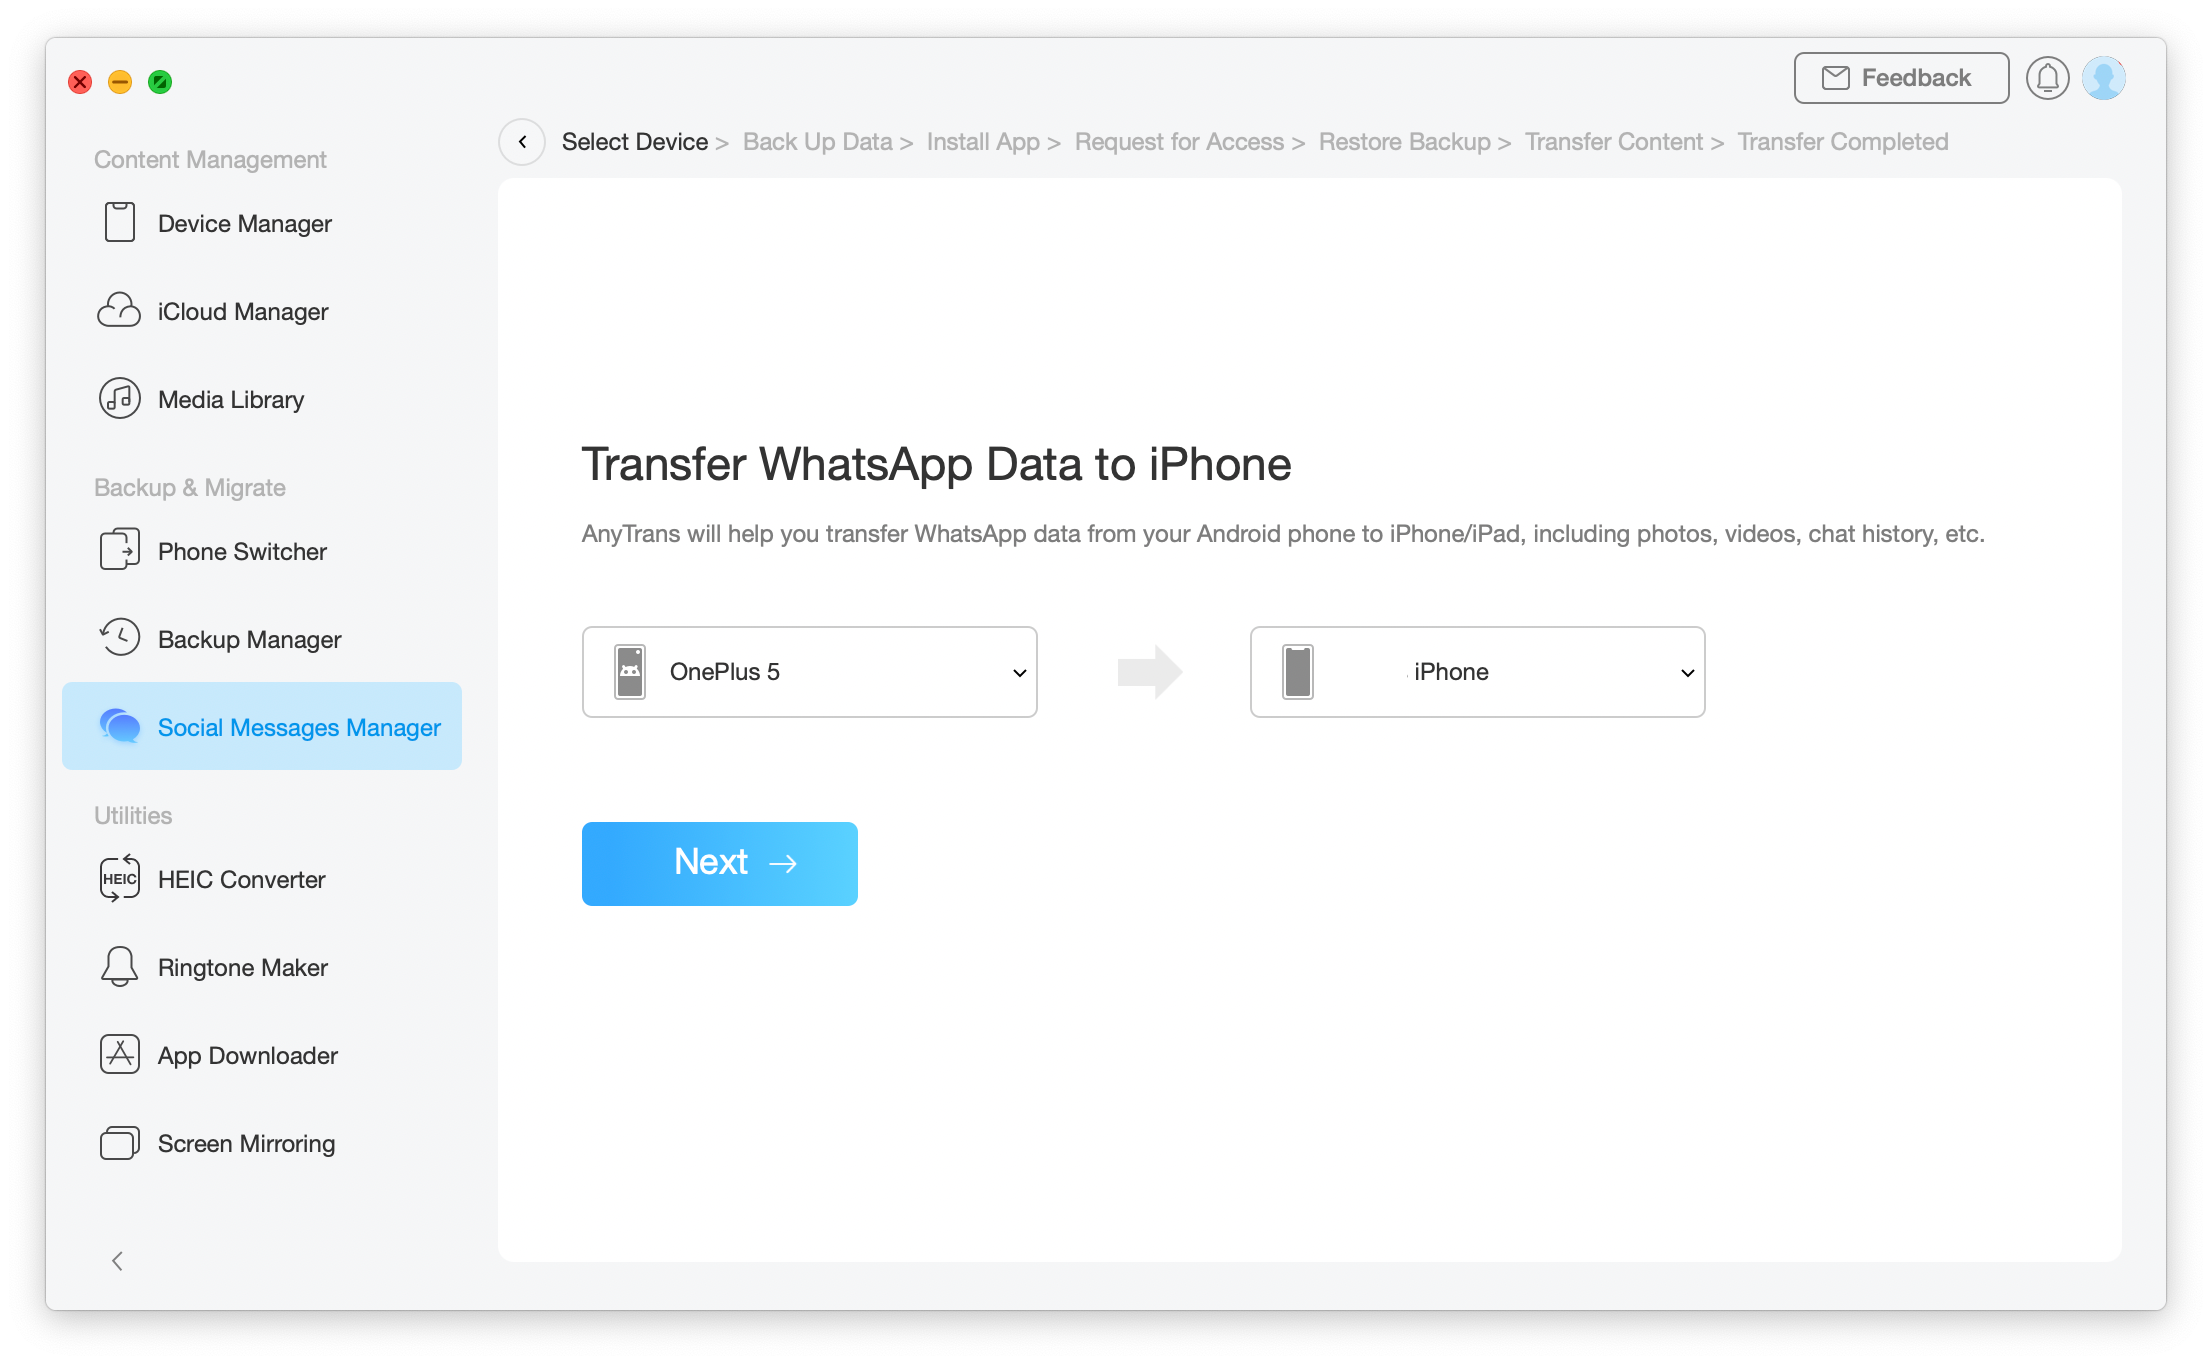 Transfer WhatsApp data from android to iphone in AnyTrans